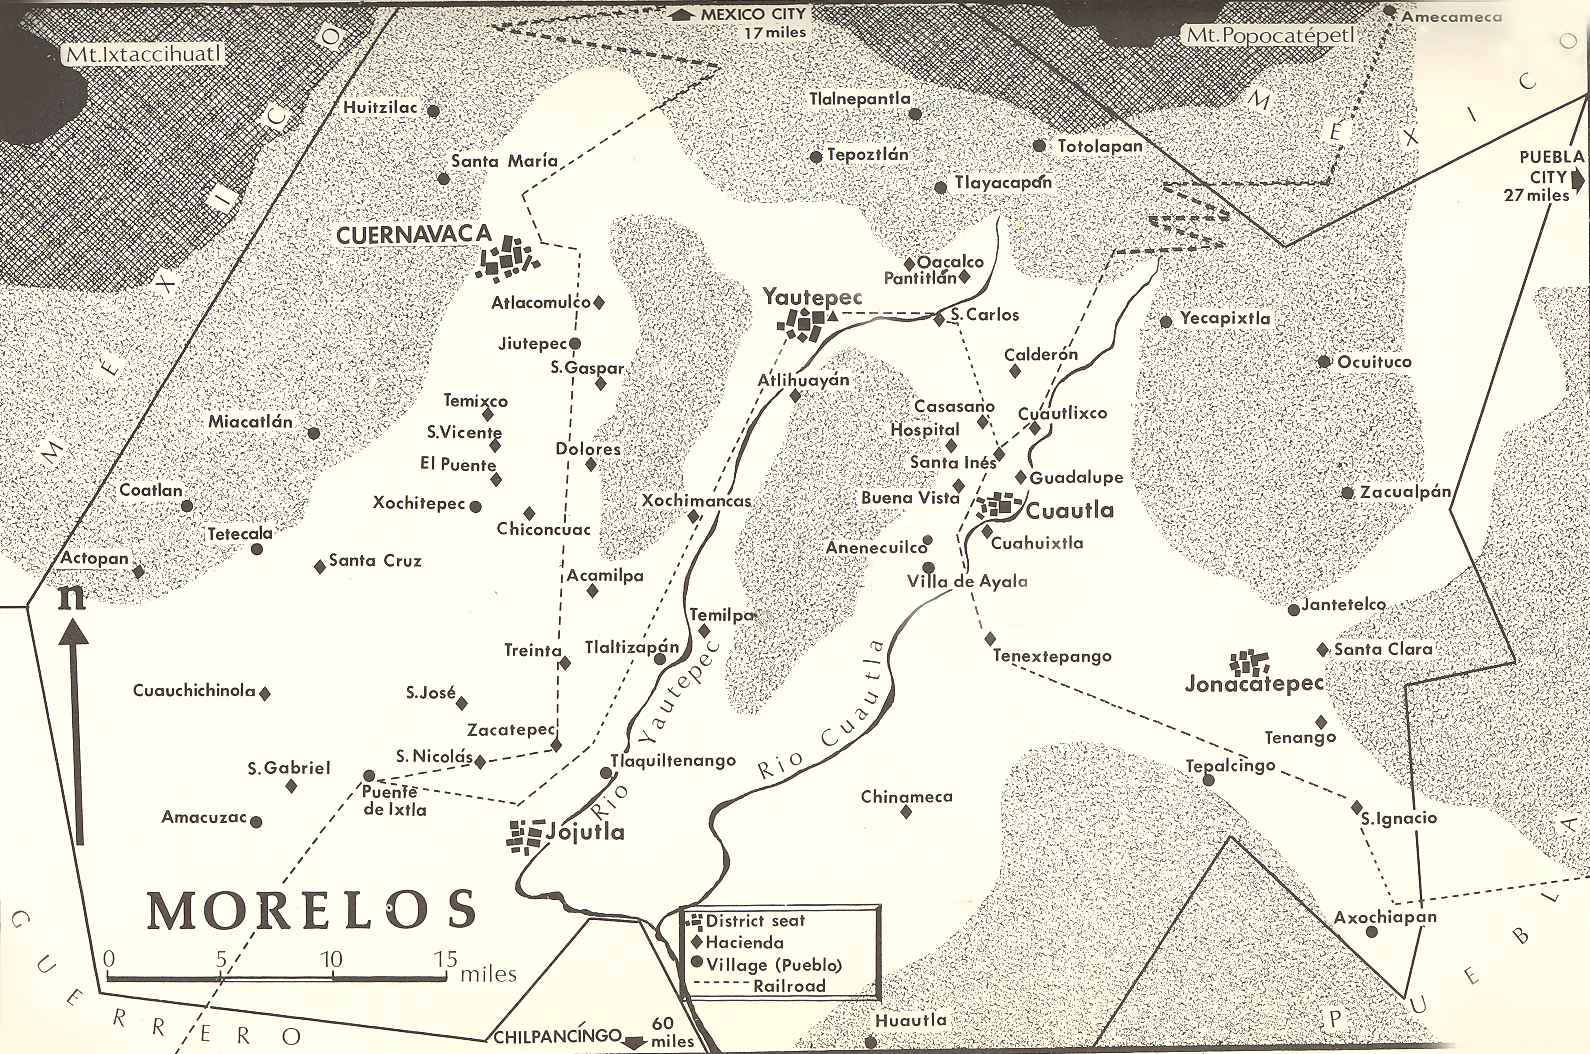 Historical Map of the Mexican State (estado) of Morelos, around 1910